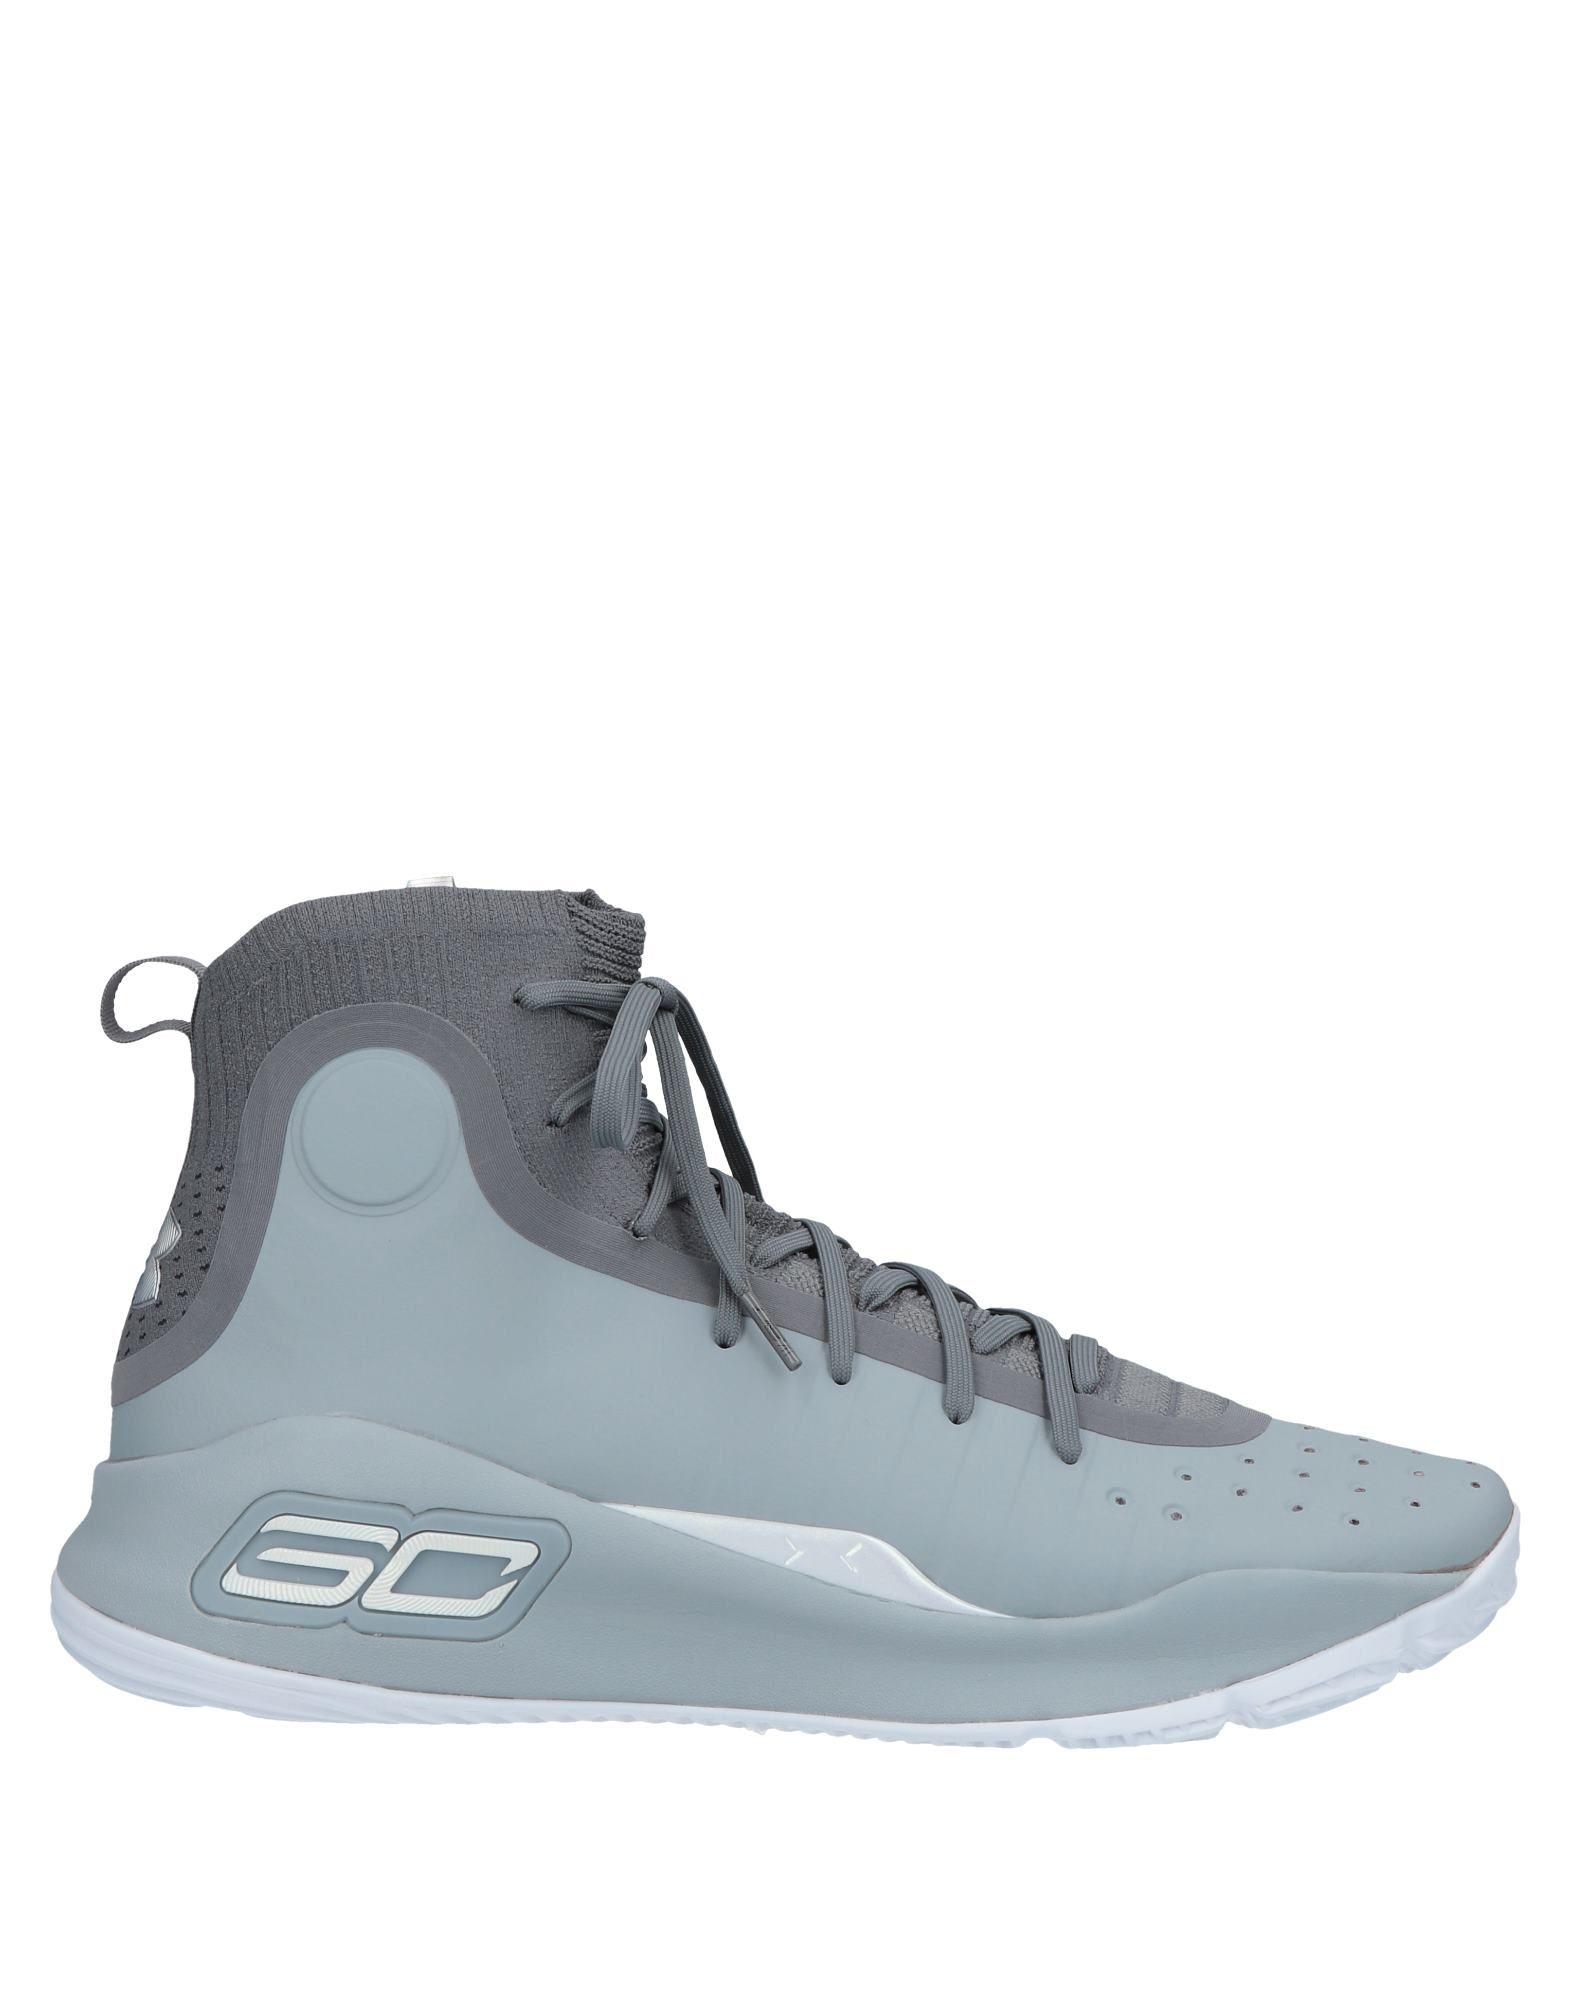 Under Armour High-tops & Sneakers in Light Grey (Gray) for Men - Lyst